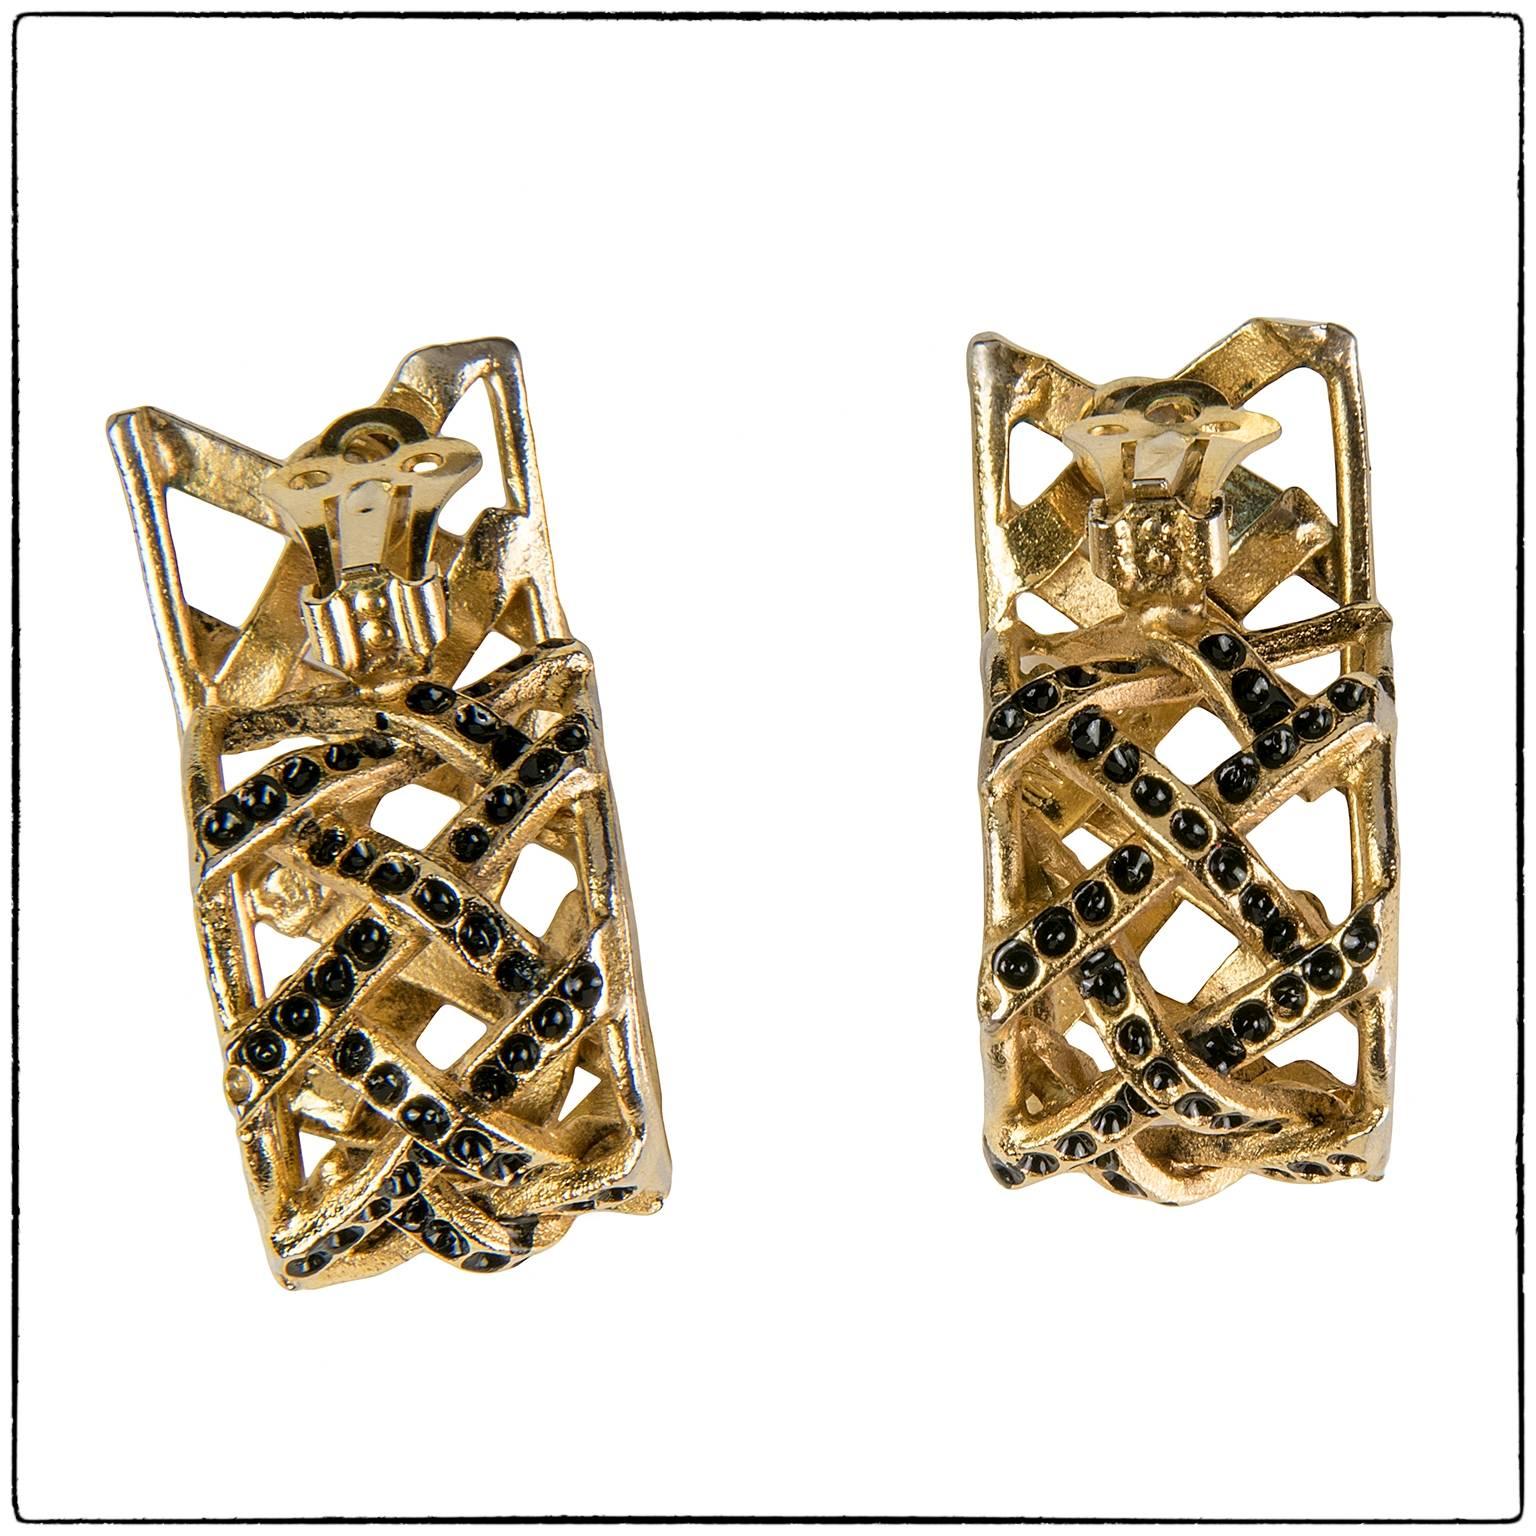 Beautiful gold tone metal Ugo Correani clip on earrings, 1980s made in Italy.

Earrings height measures 4 cm

UGO CORREANI (1935 - 1992) was an Italian fashion designer specializing in accessories and jewelry design.
Born in Frascati, at 20 years